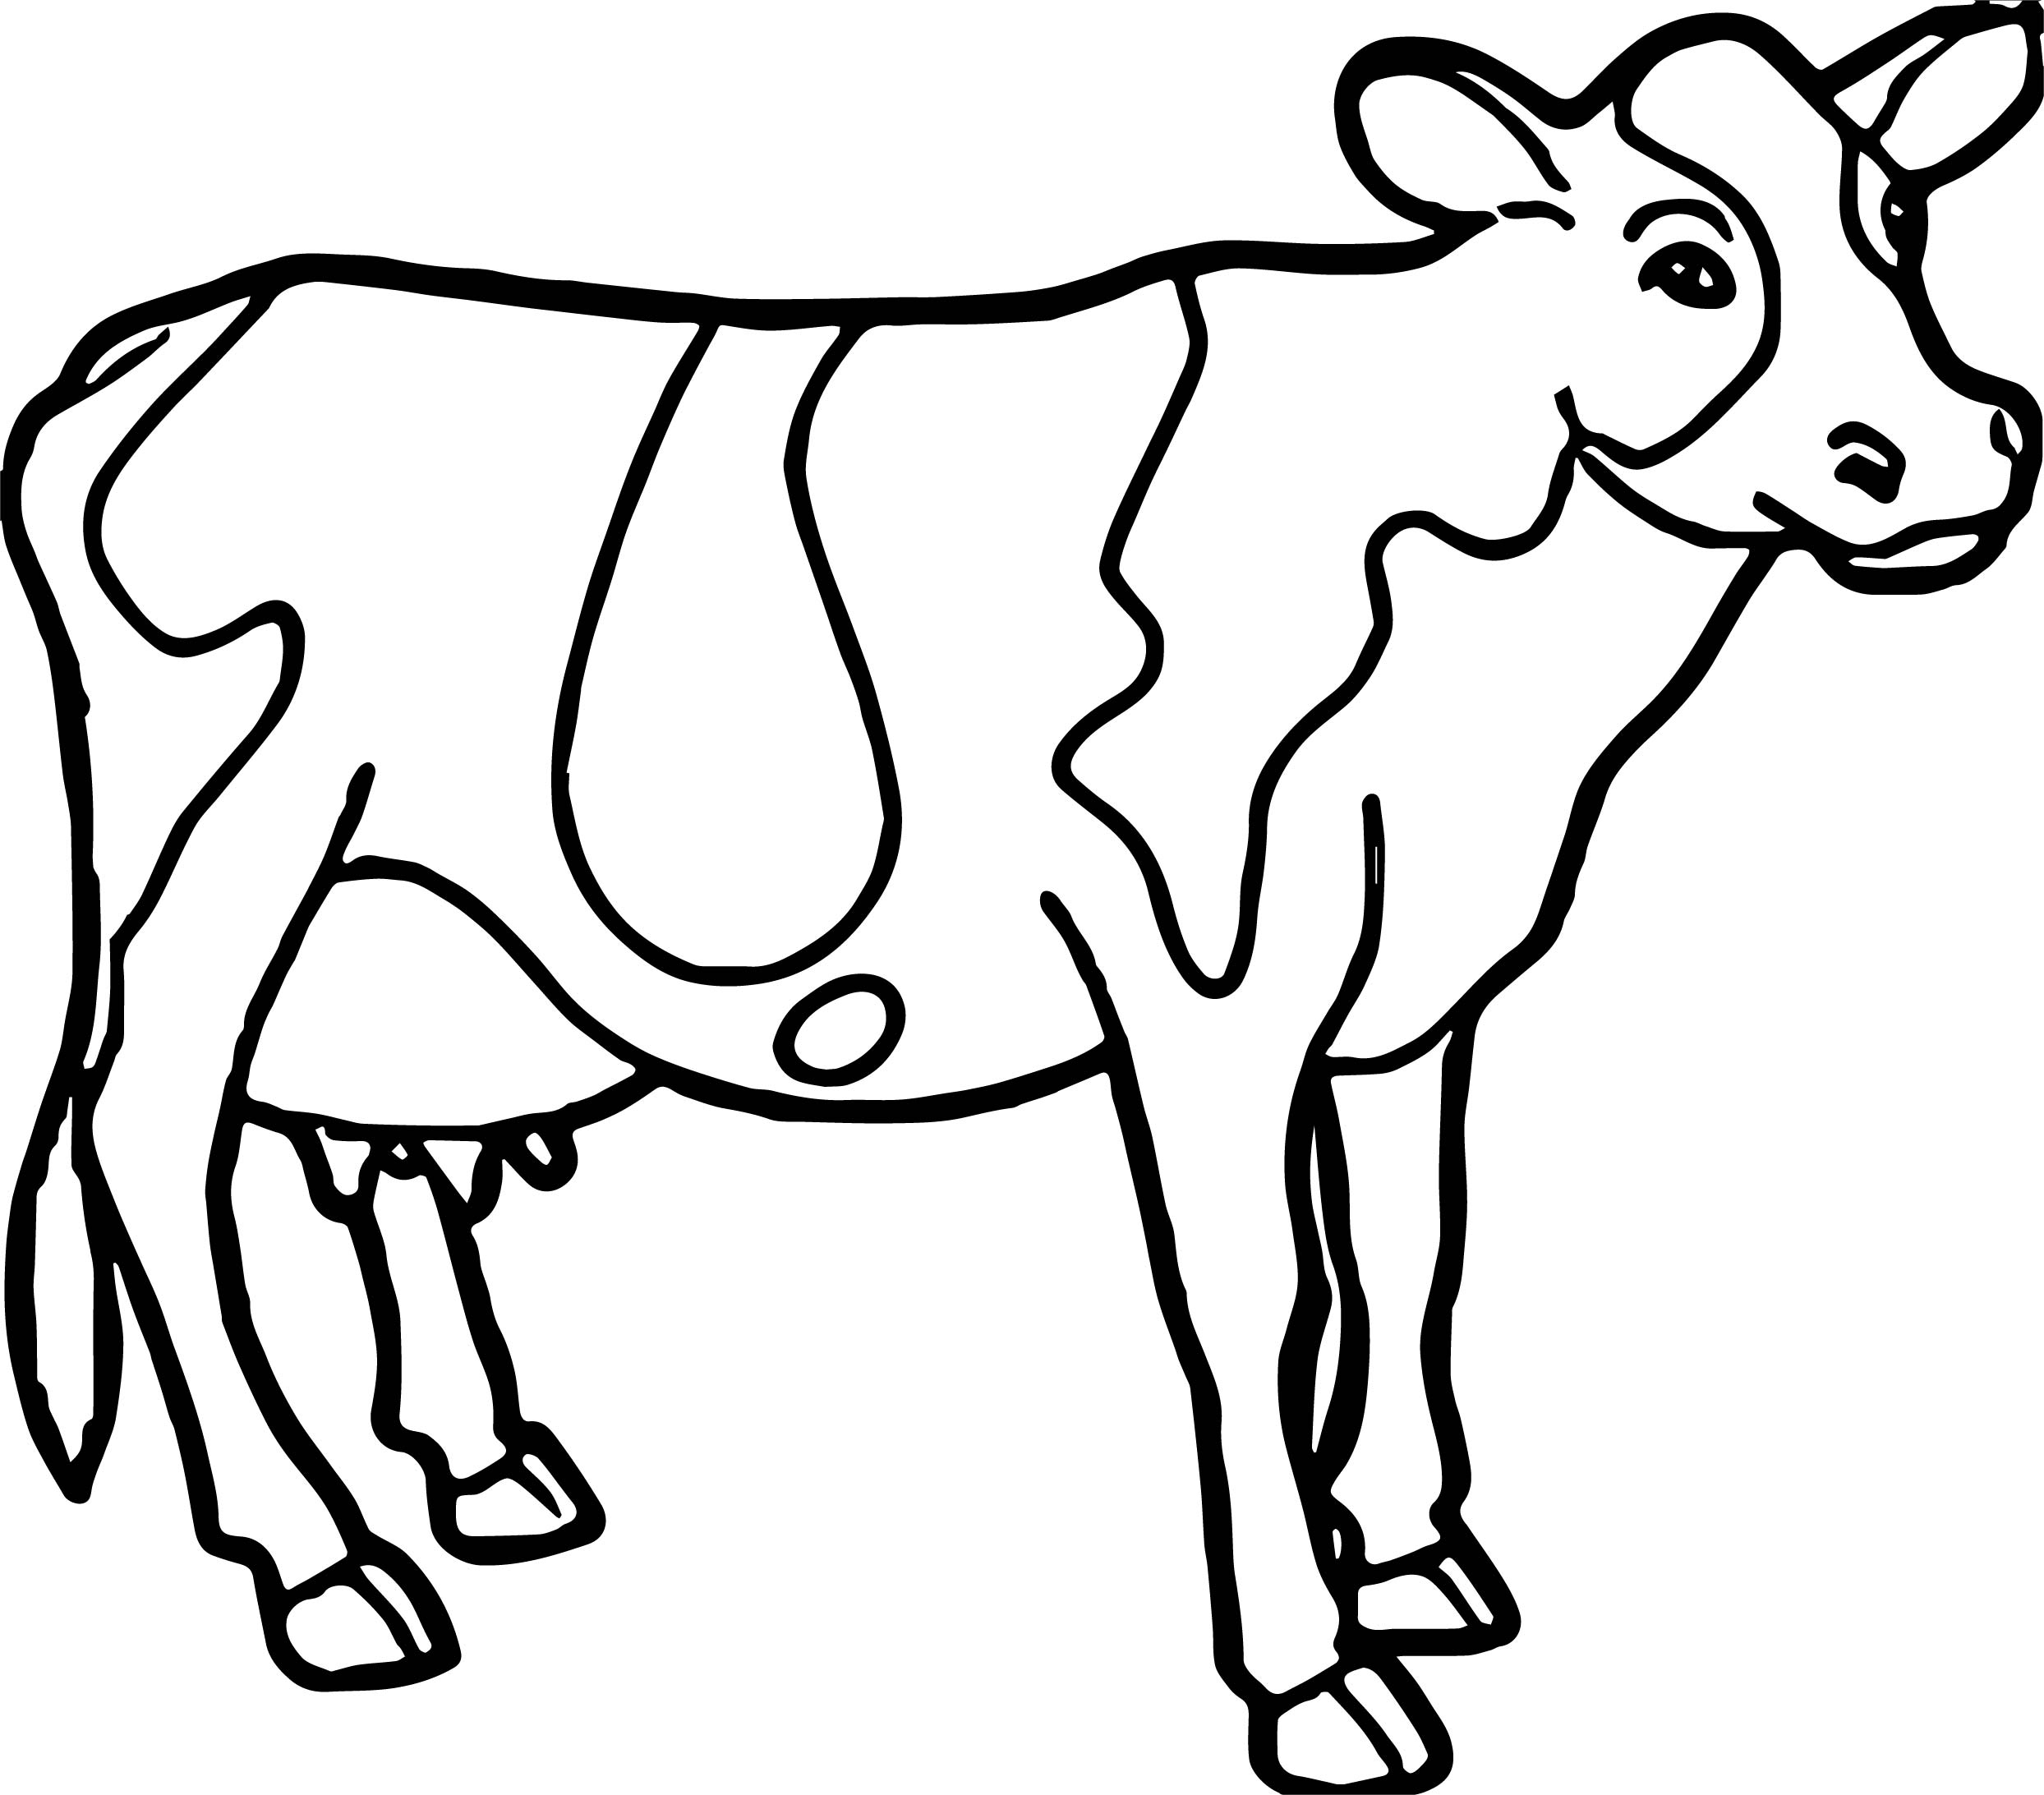 Cute Cow Coloring Pages at GetColorings.com | Free printable colorings ...